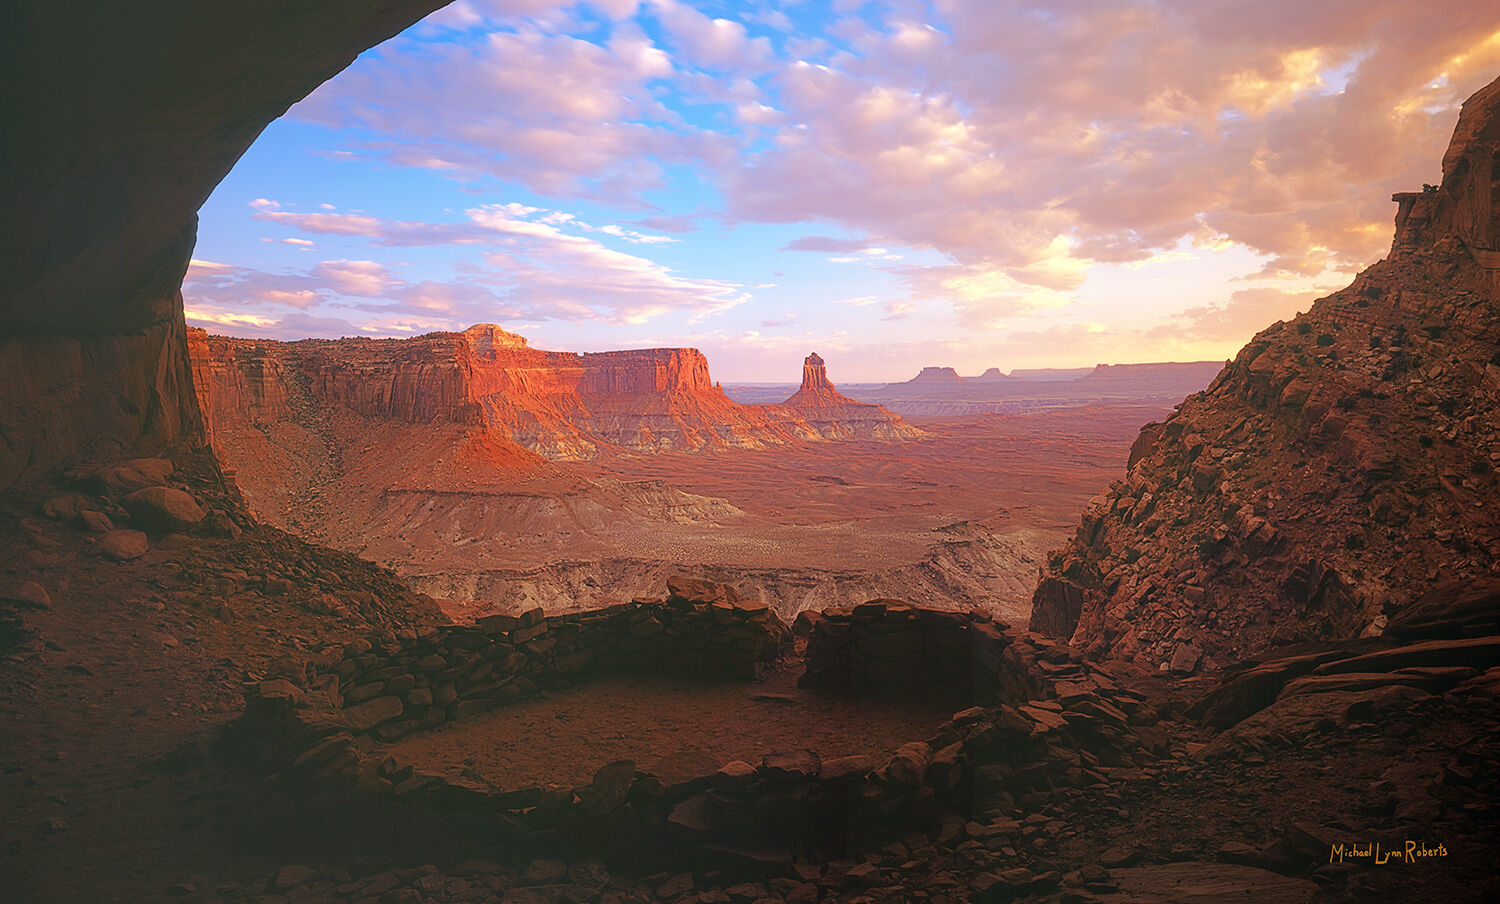 This is a sunset view from the depths of False Kiva, looking out over Soda Basin in Canyonlands National Park. The shadowed foreground...